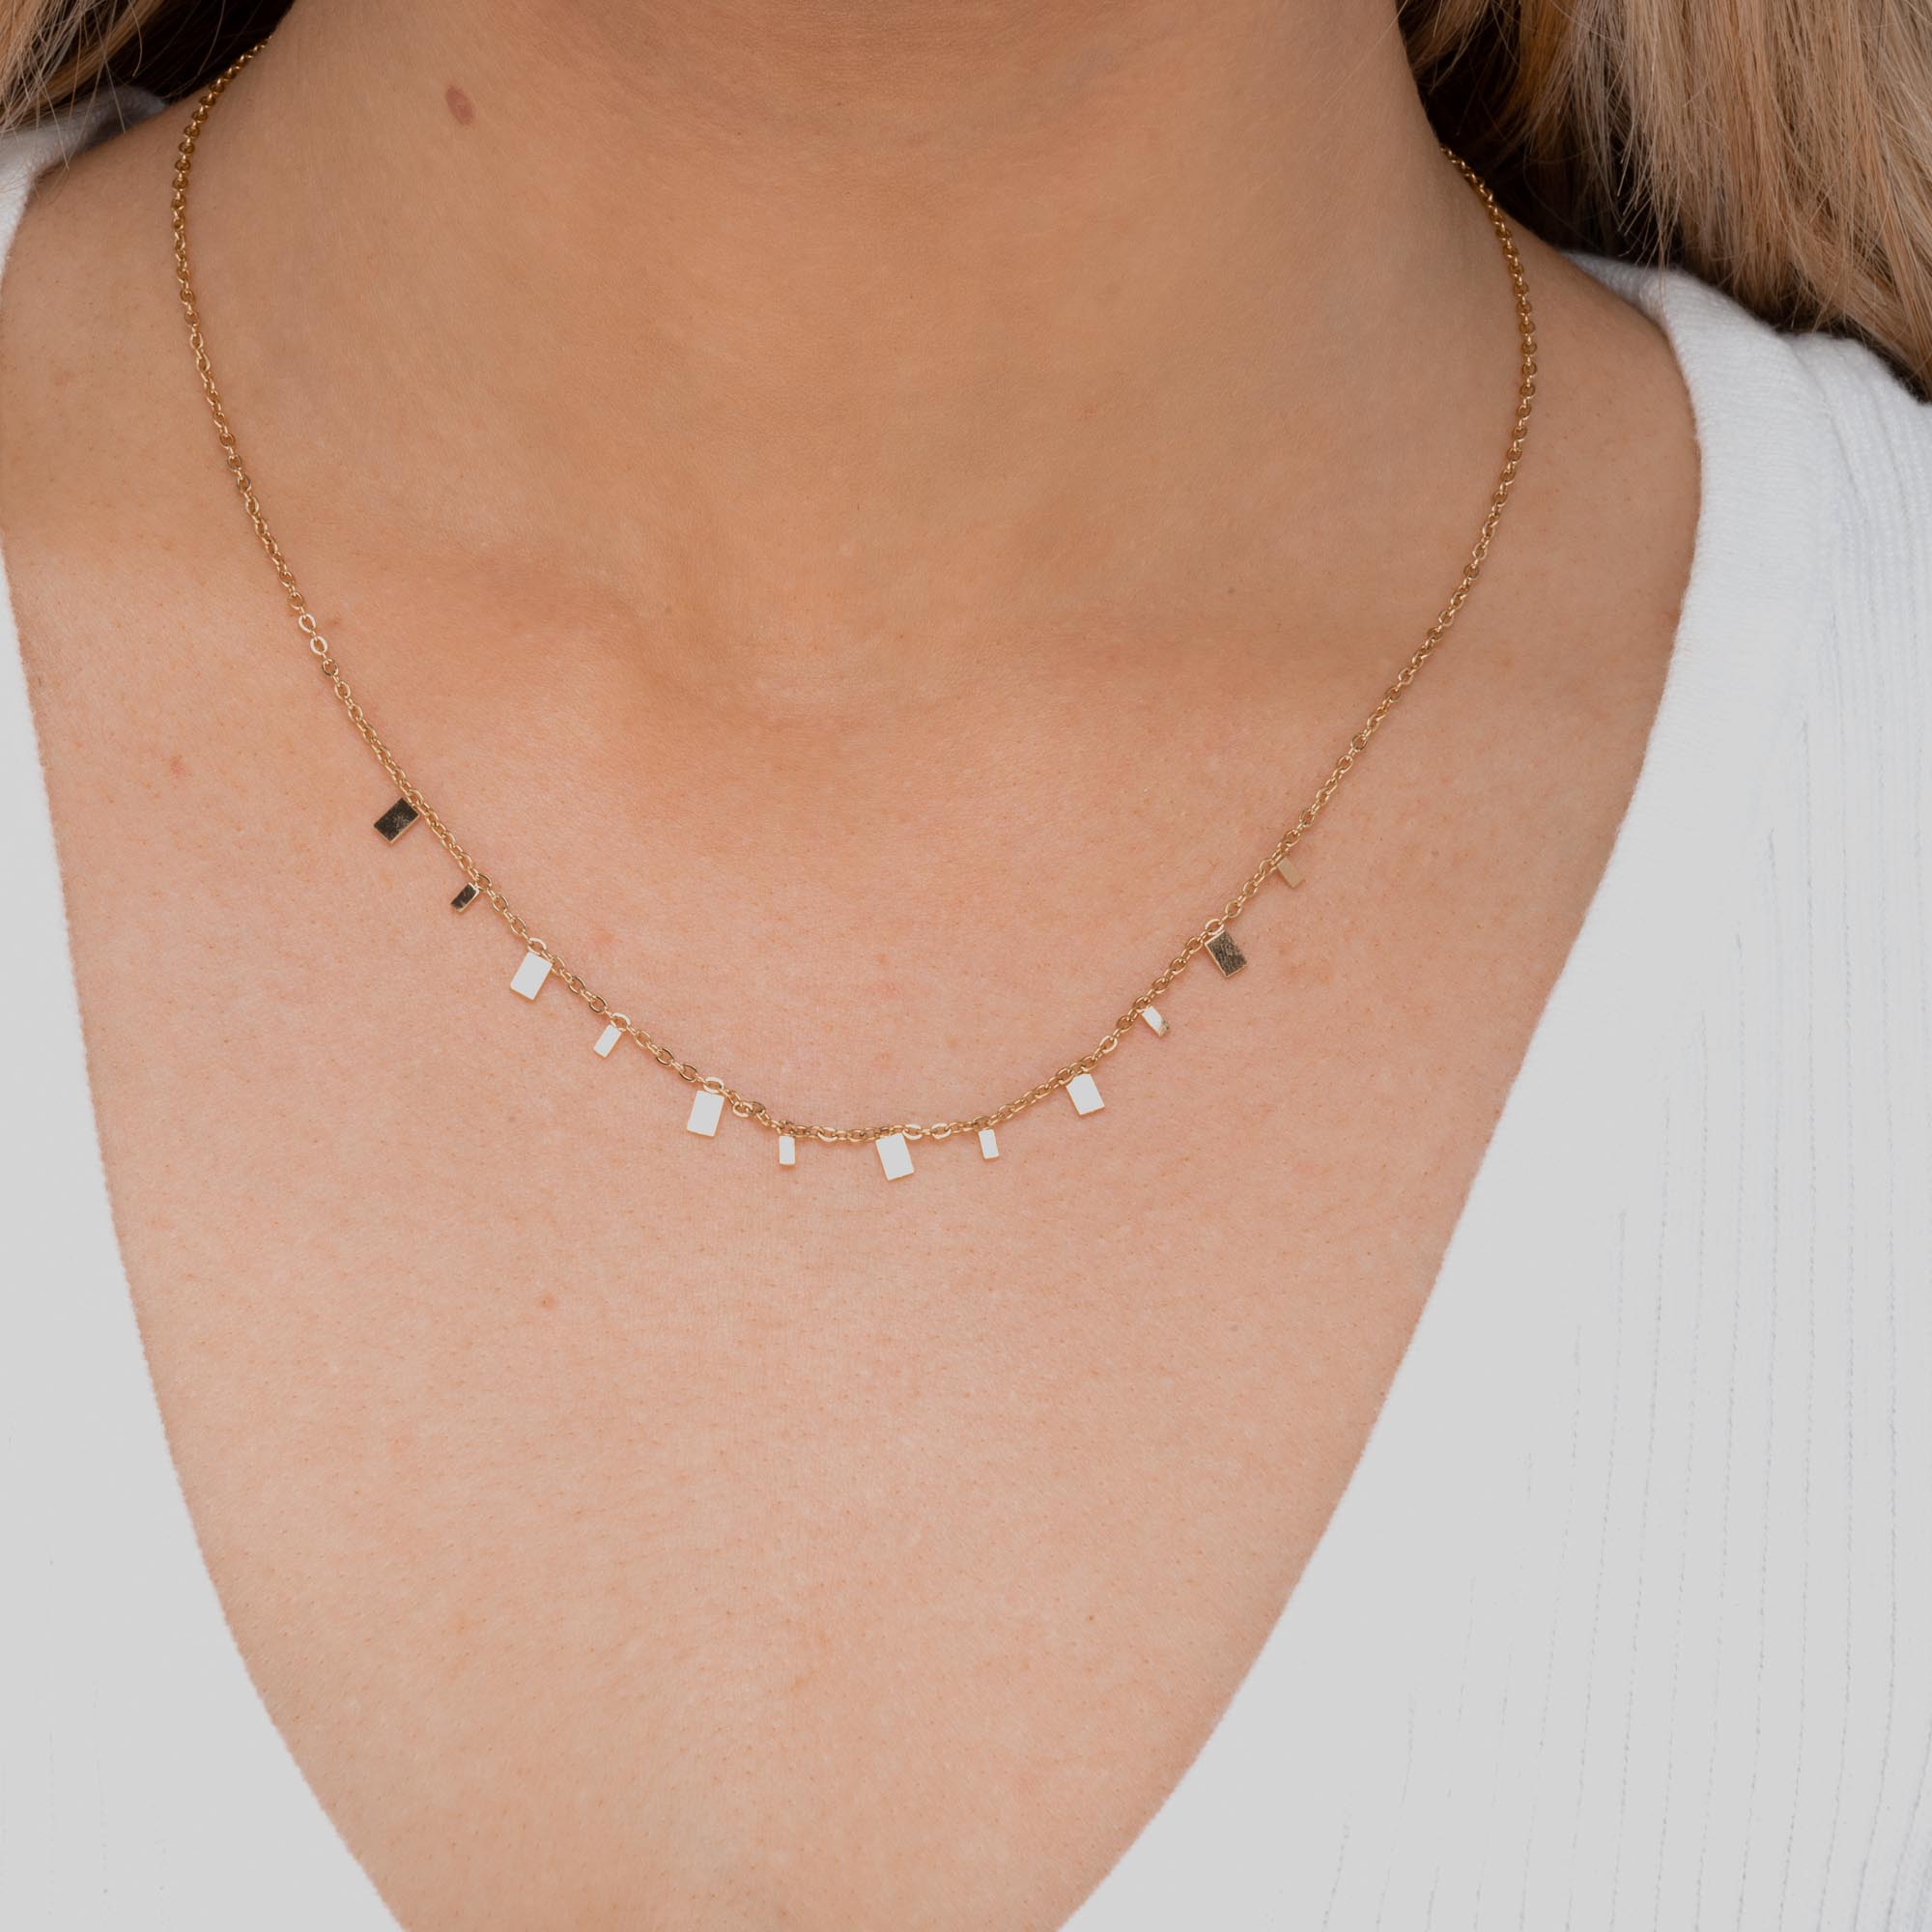 Square Layering Chain Necklace